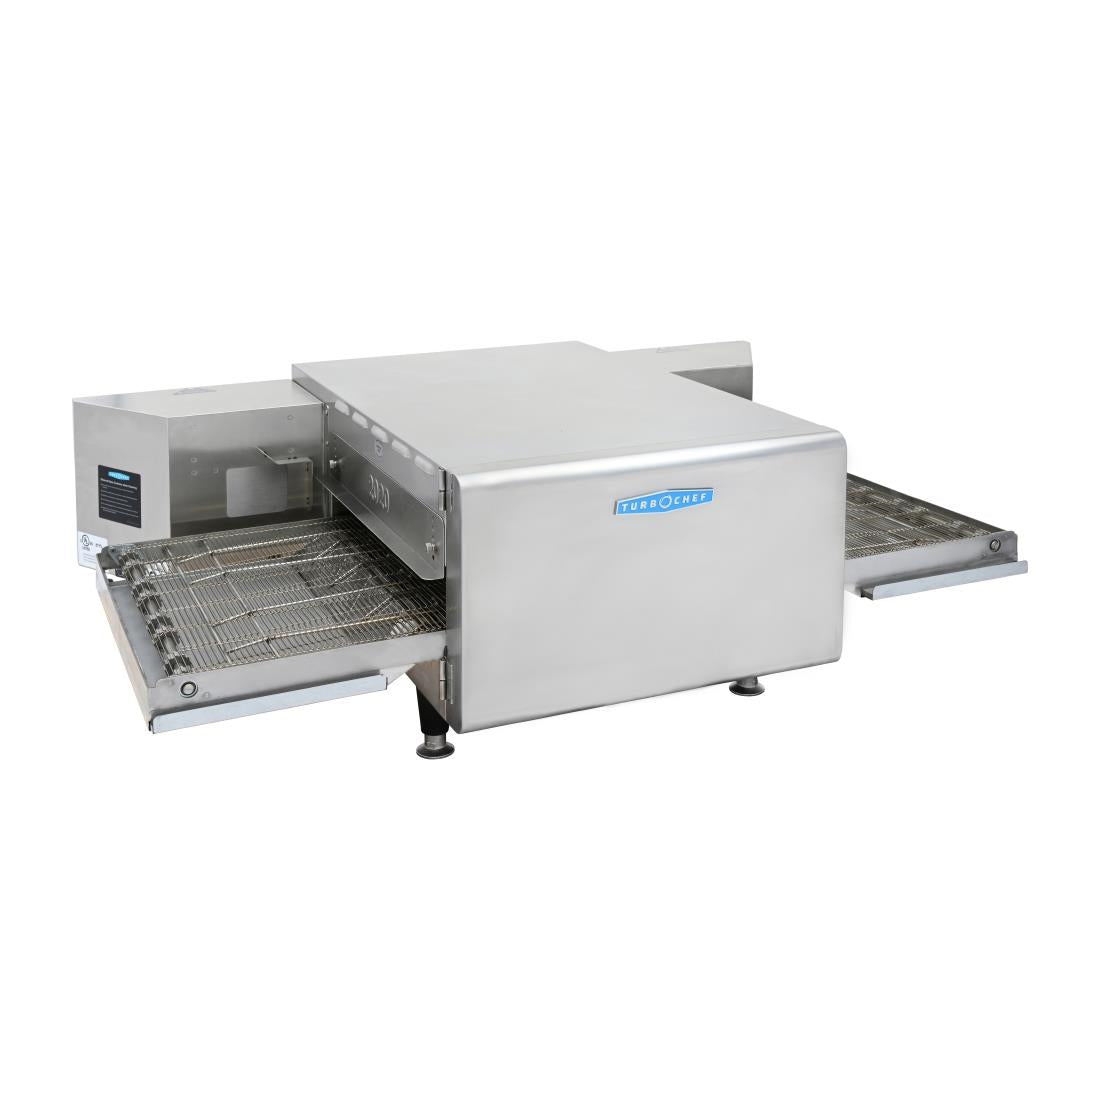 CH230 Turbochef Ventless High Speed Conveyor Oven 2020 JD Catering Equipment Solutions Ltd